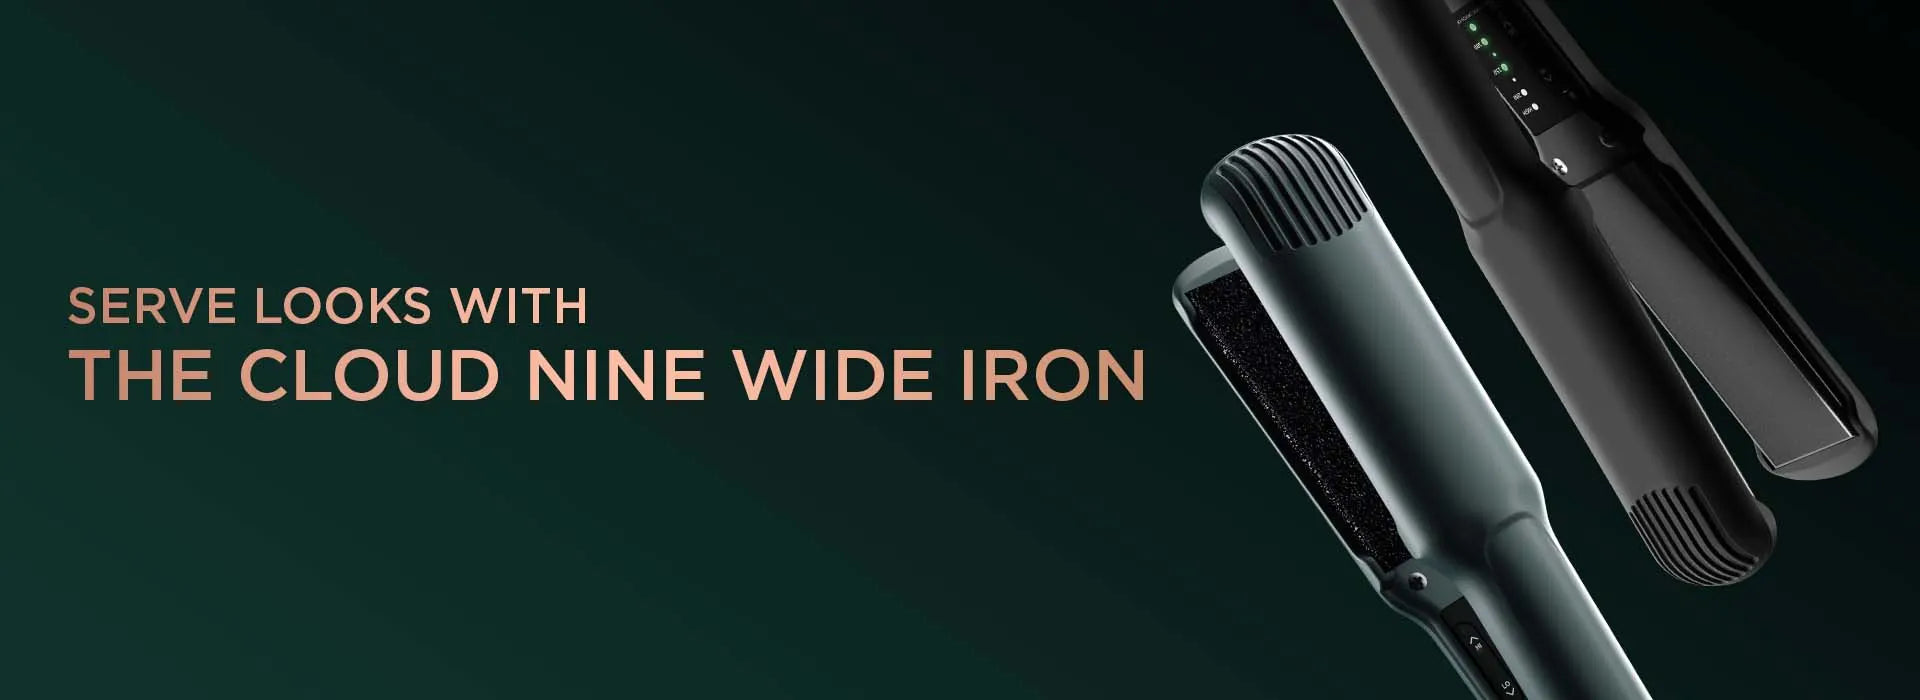 Two images of the Wide Iron on a dark green background with the text 'Serve looks with the CLOUD NINE Wide Iron'.